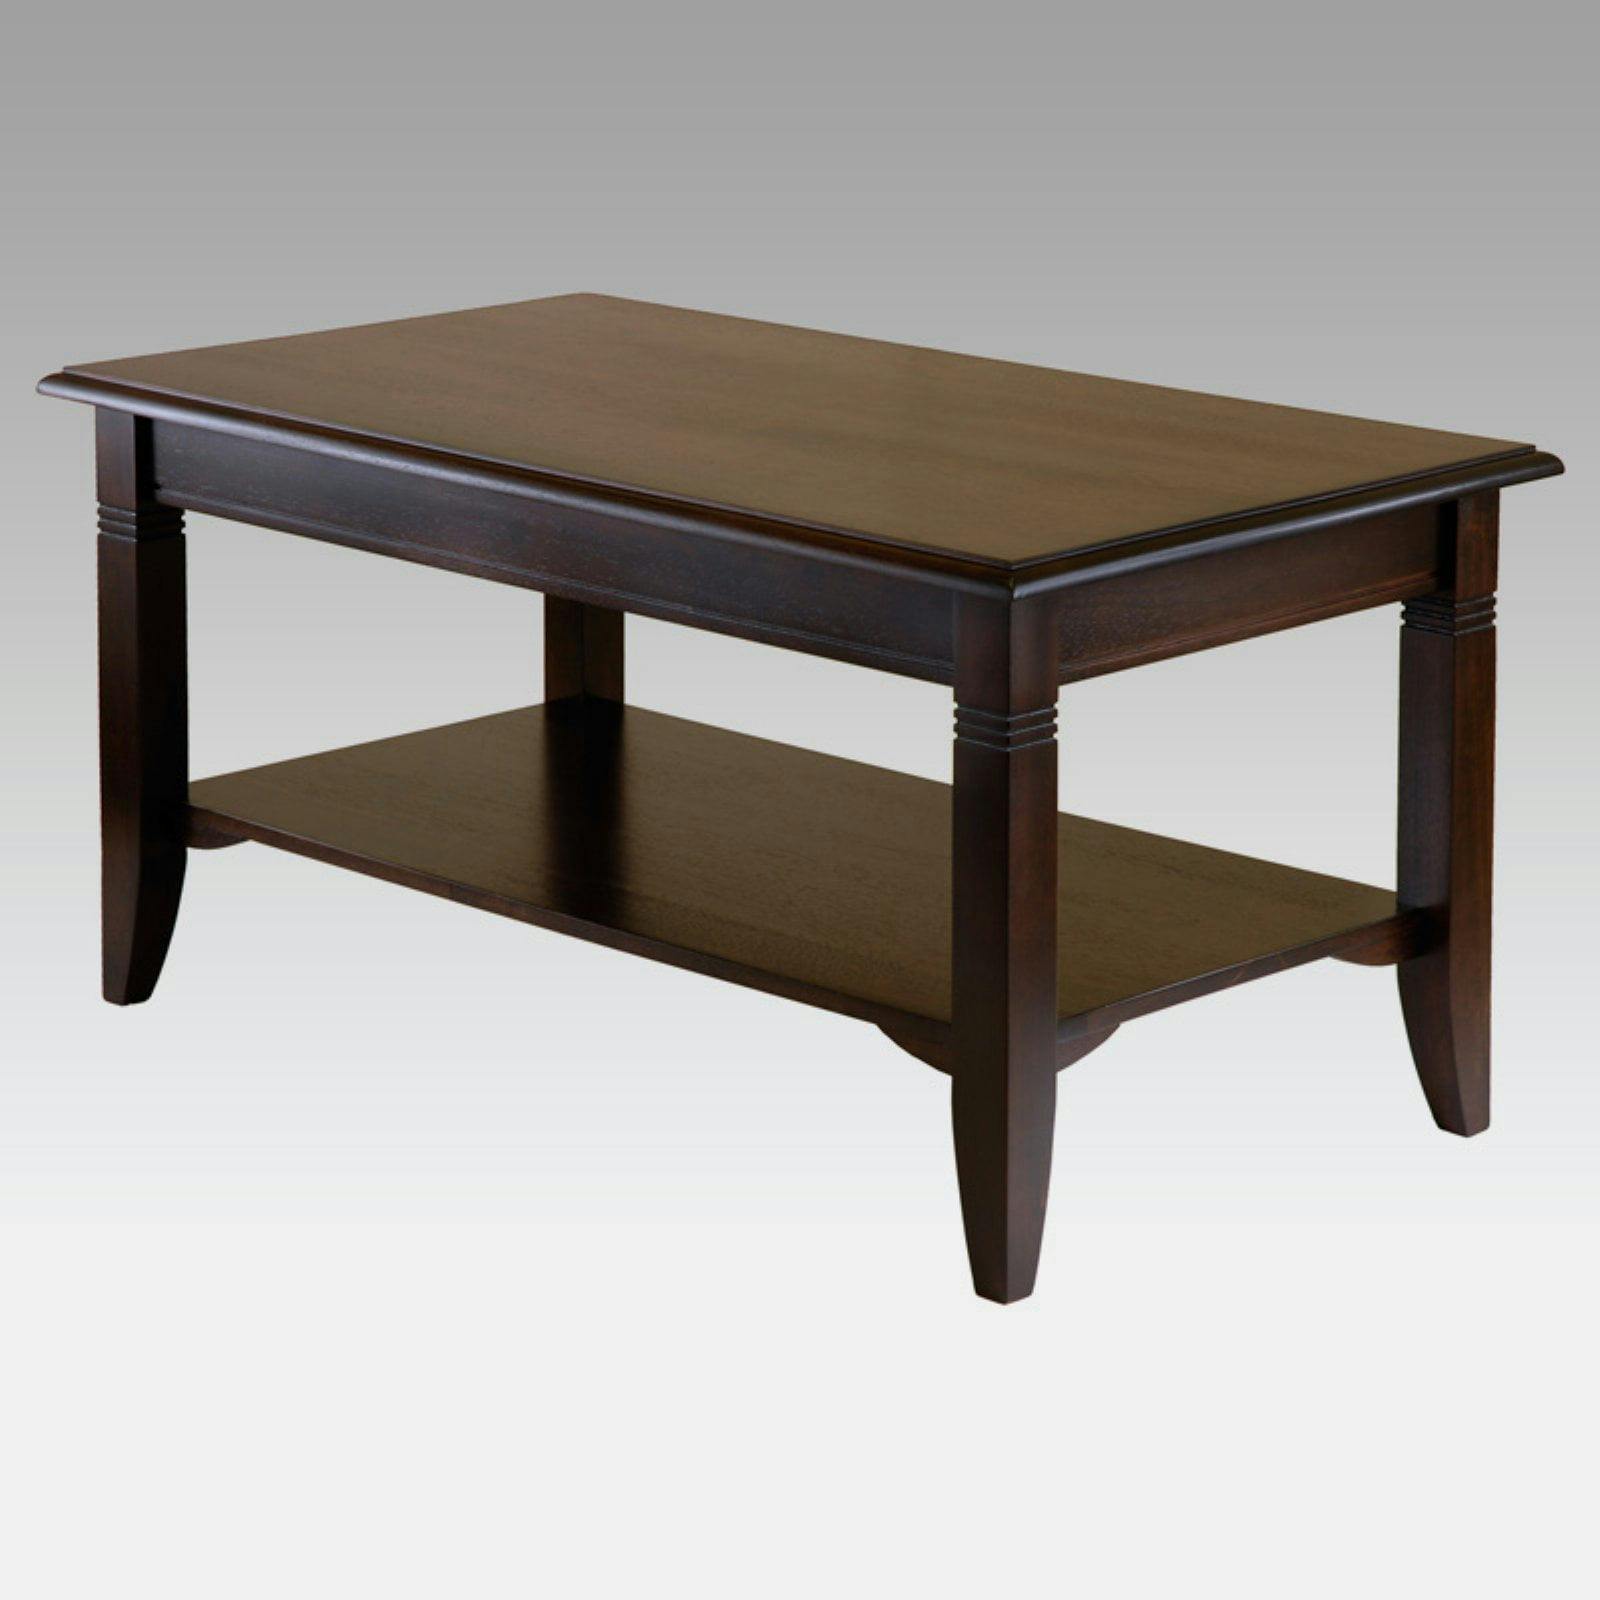 Transitional Cappuccino Brown Rectangular Wood Coffee Table